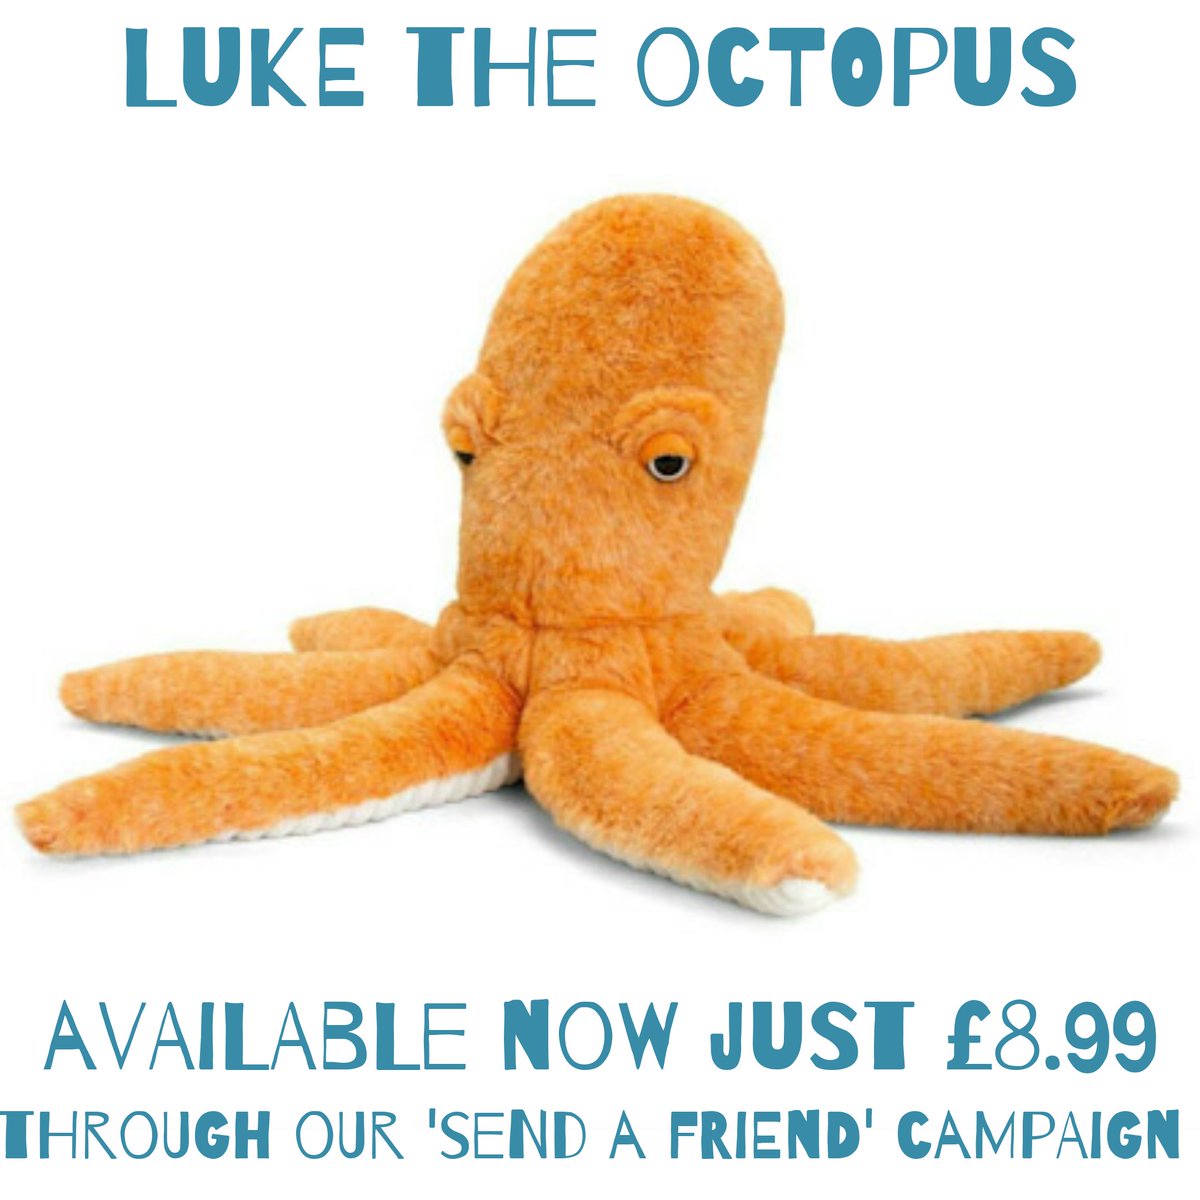 It's the 1st! Welcome to the latest member of our special 'Send A Friend' gang... introducing Luke The Octopus 🐙 How cute is he? Perfect for autumn with his orangey sunset colours. Available to buy now on our website where you can also read his heartbreaking backstory. 💙